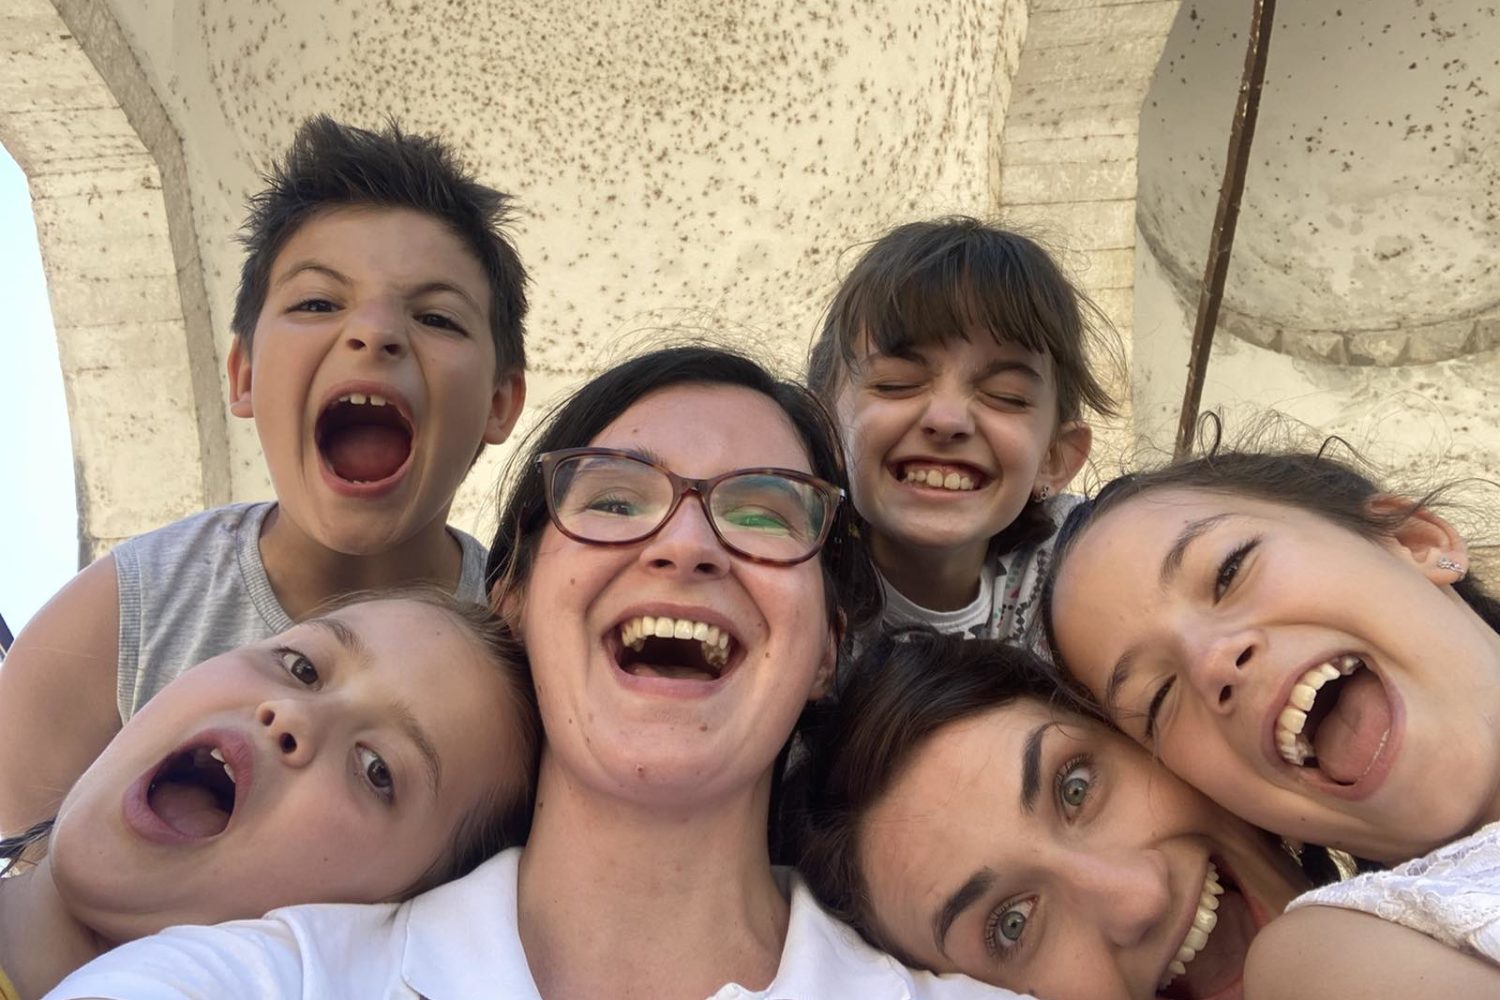 Group of smiling children and two adults taking a selfie